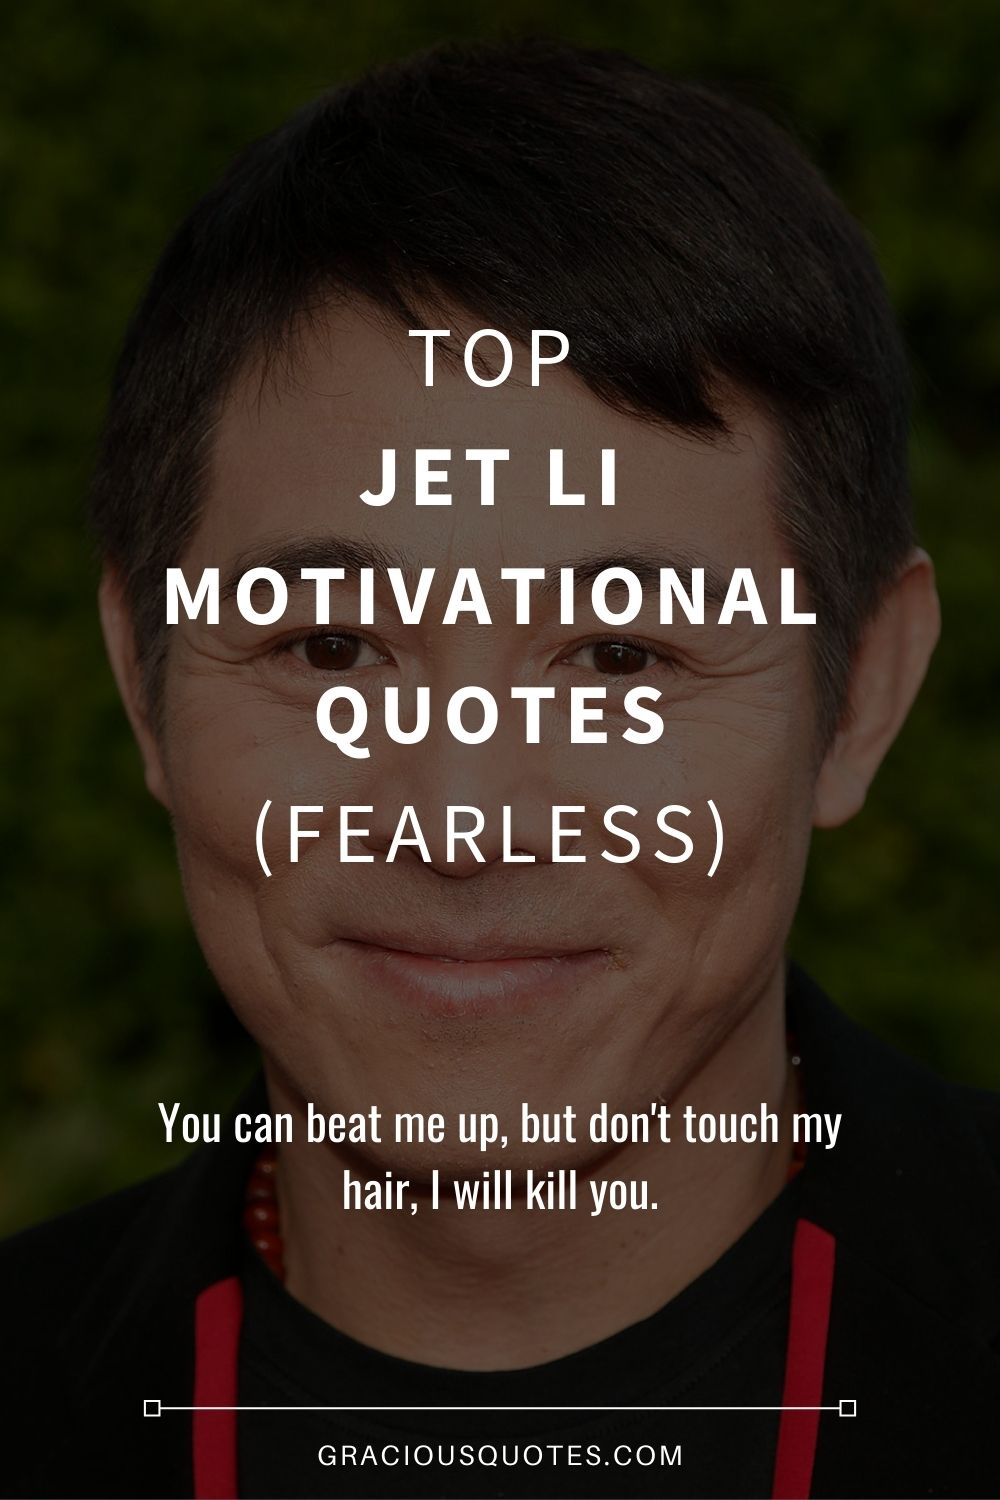 Top Jet Li Motivational Quotes (FEARLESS) - Gracious Quotes